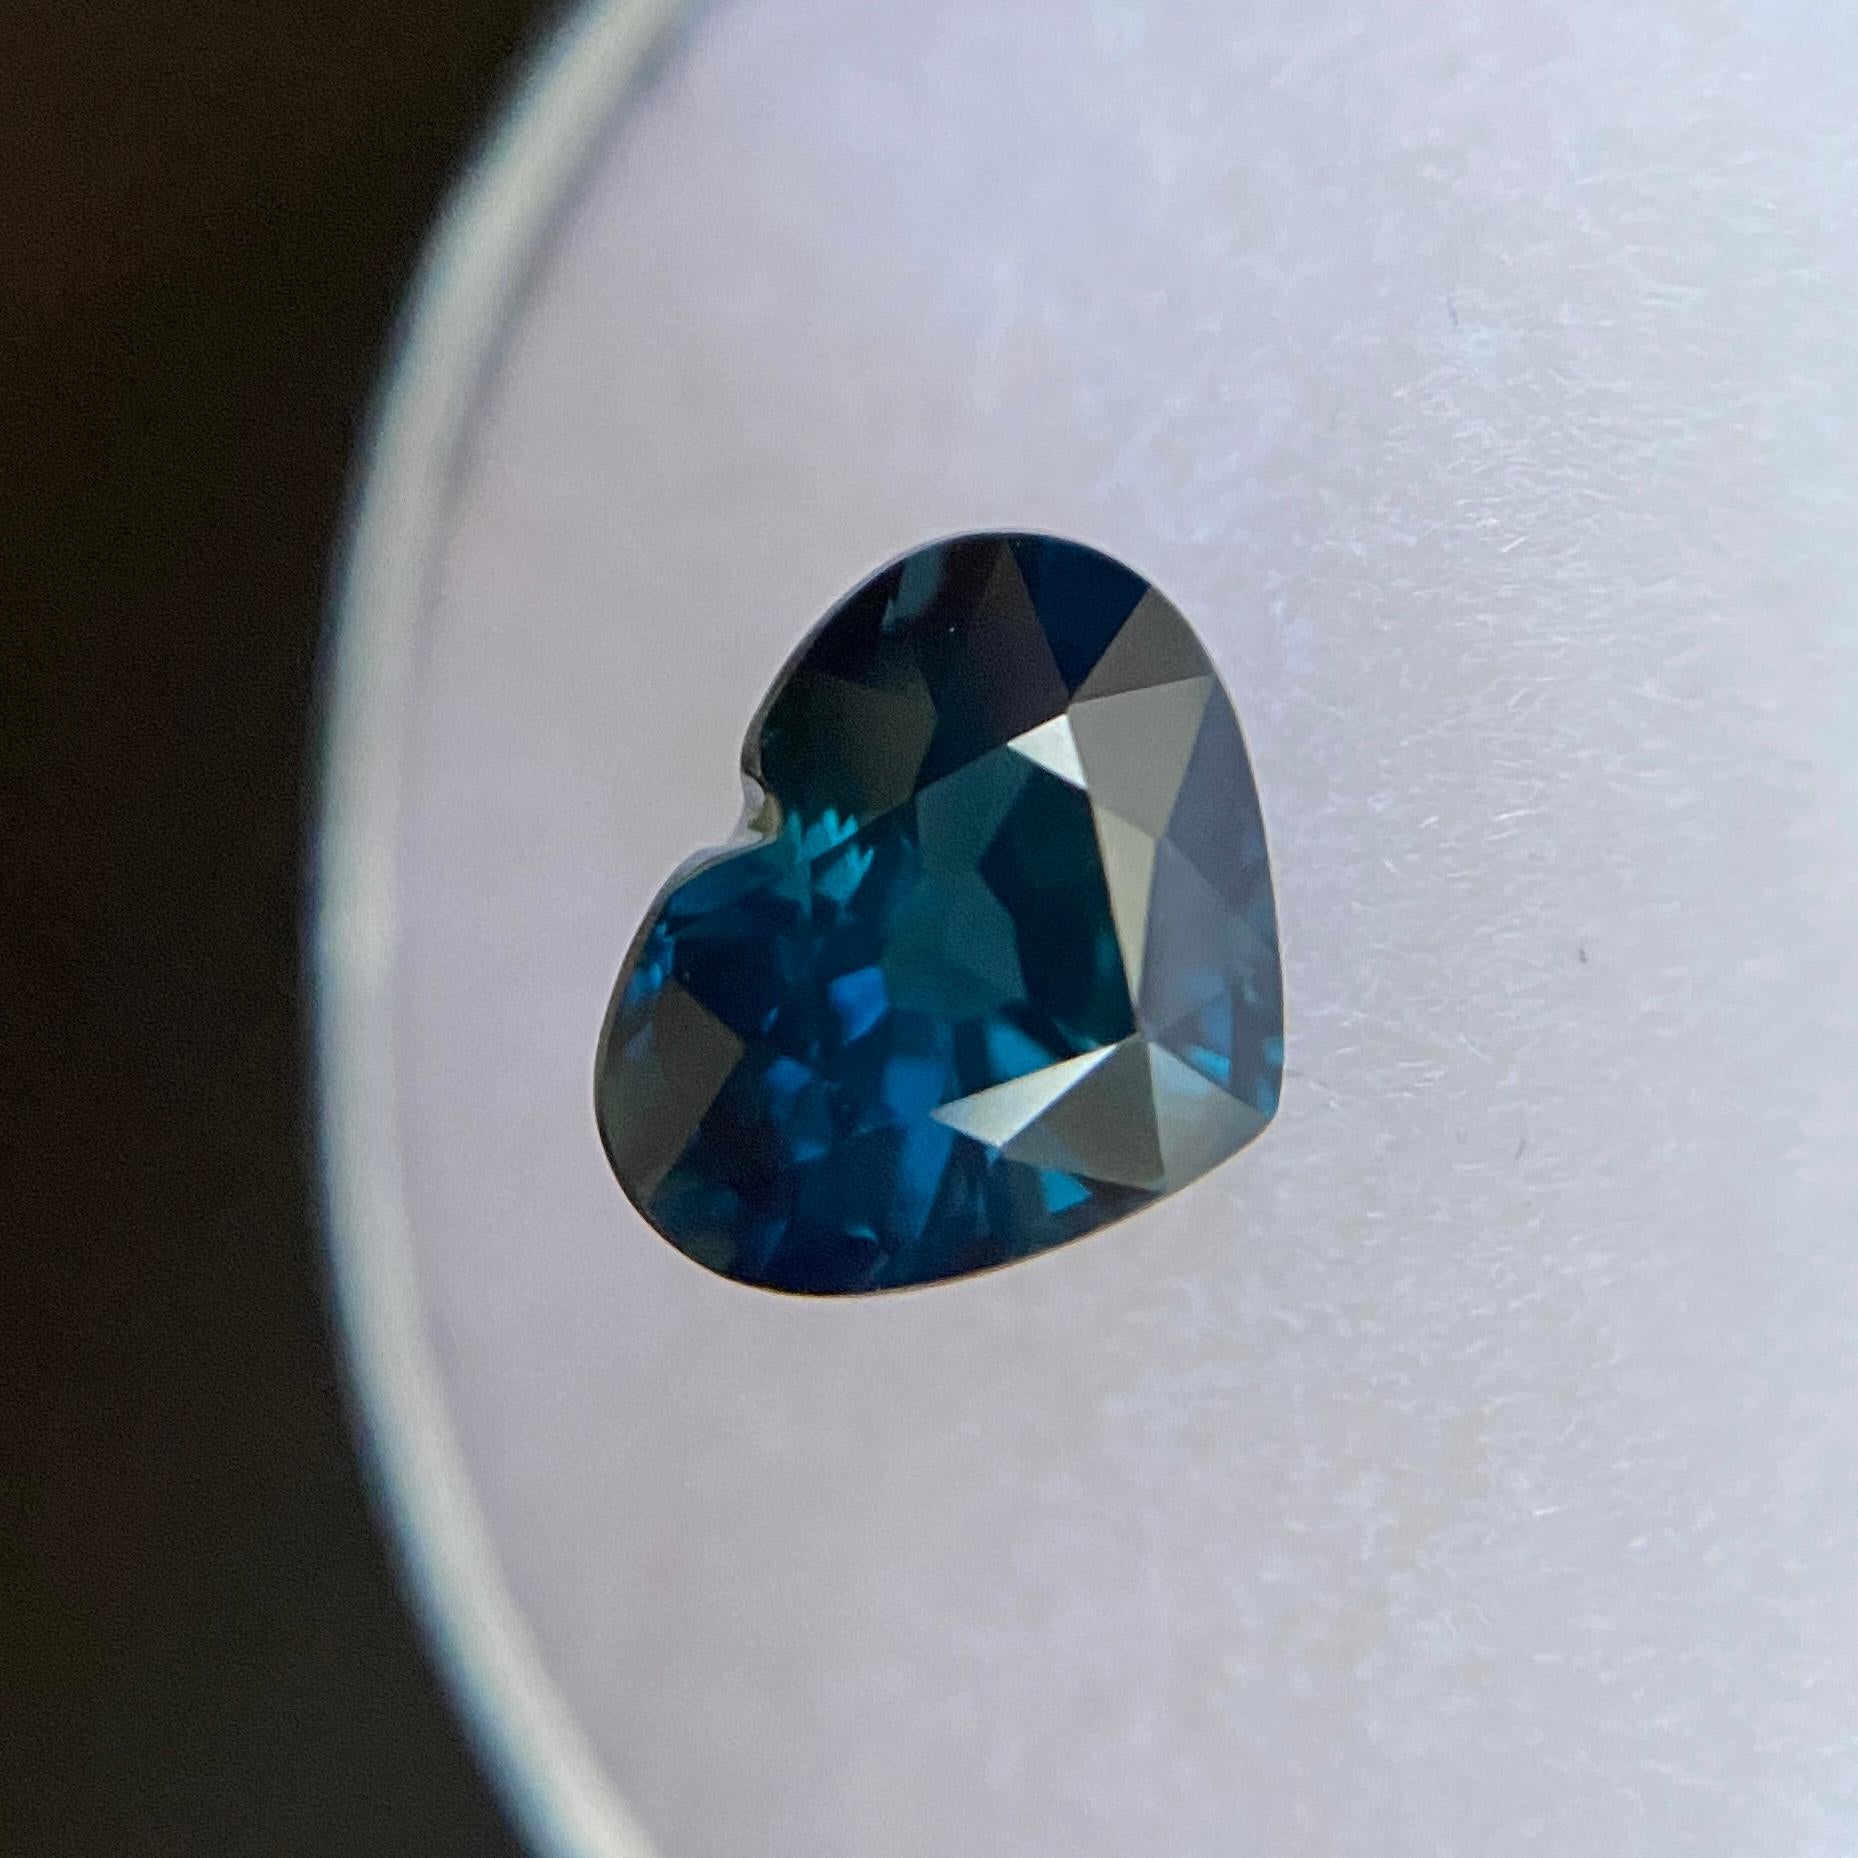 Natural Deep Blue Australian Sapphire Gemstone.

2.31 Carat with a beautiful deep blue colour and excellent clarity, a very clean stone. Also has an excellent heart cut and ideal polish to show great shine and colour, would look lovely in